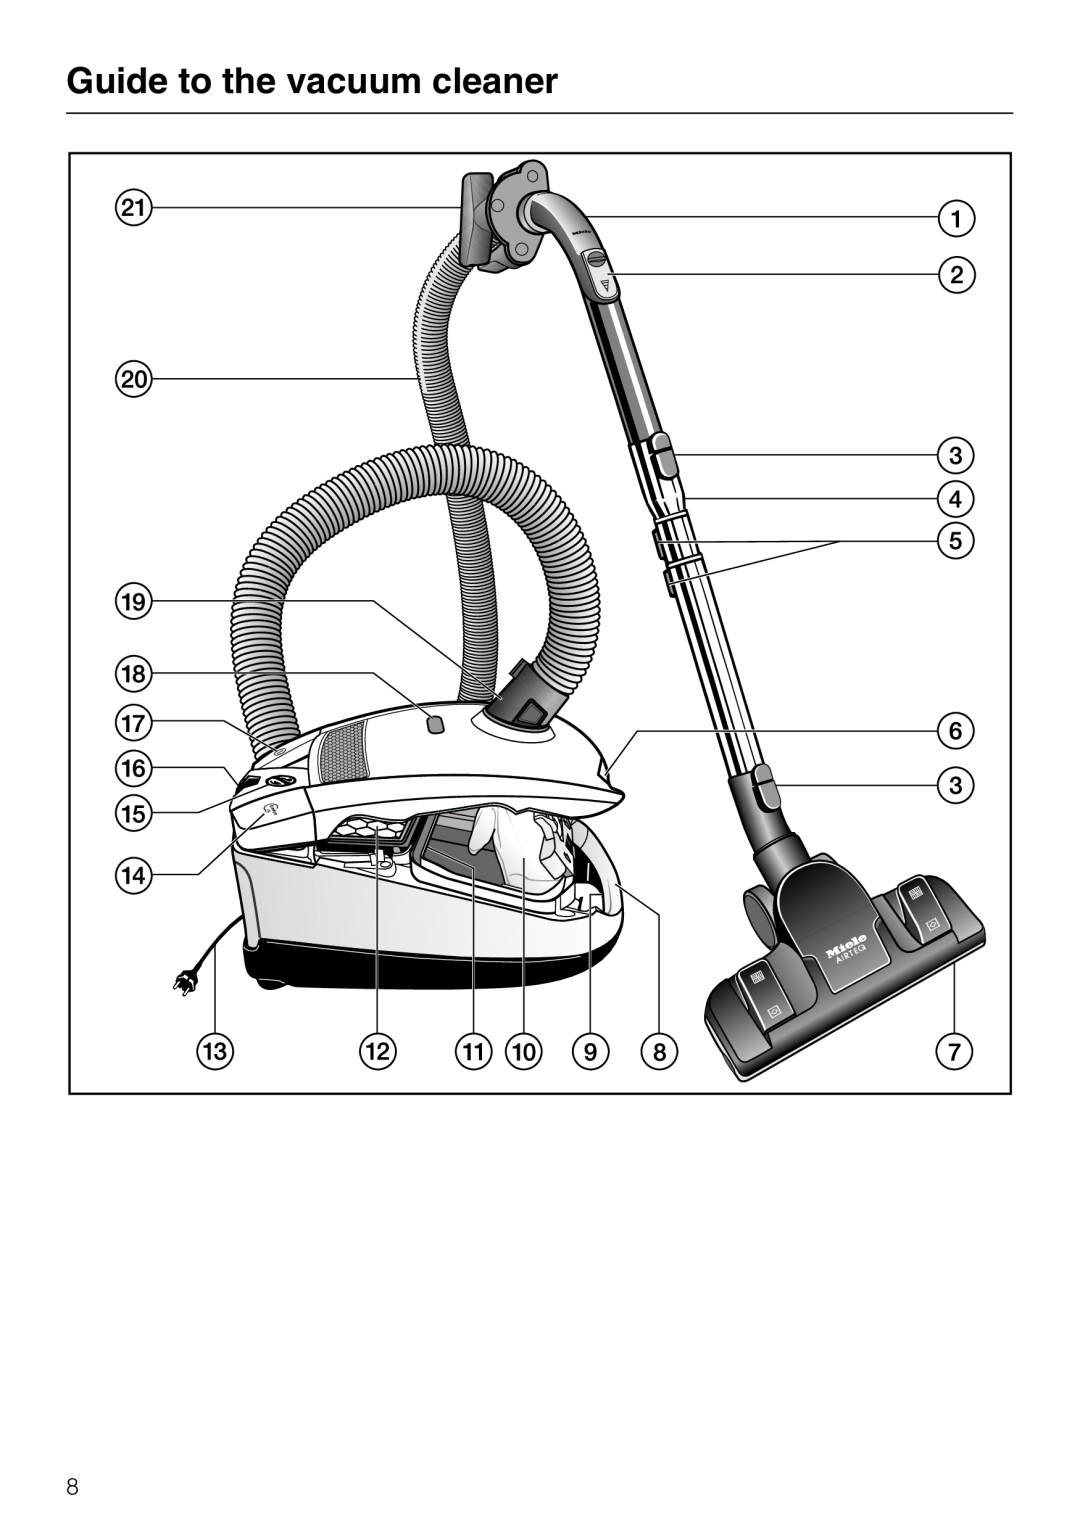 Miele S 6000 operating instructions Guide to the vacuum cleaner 